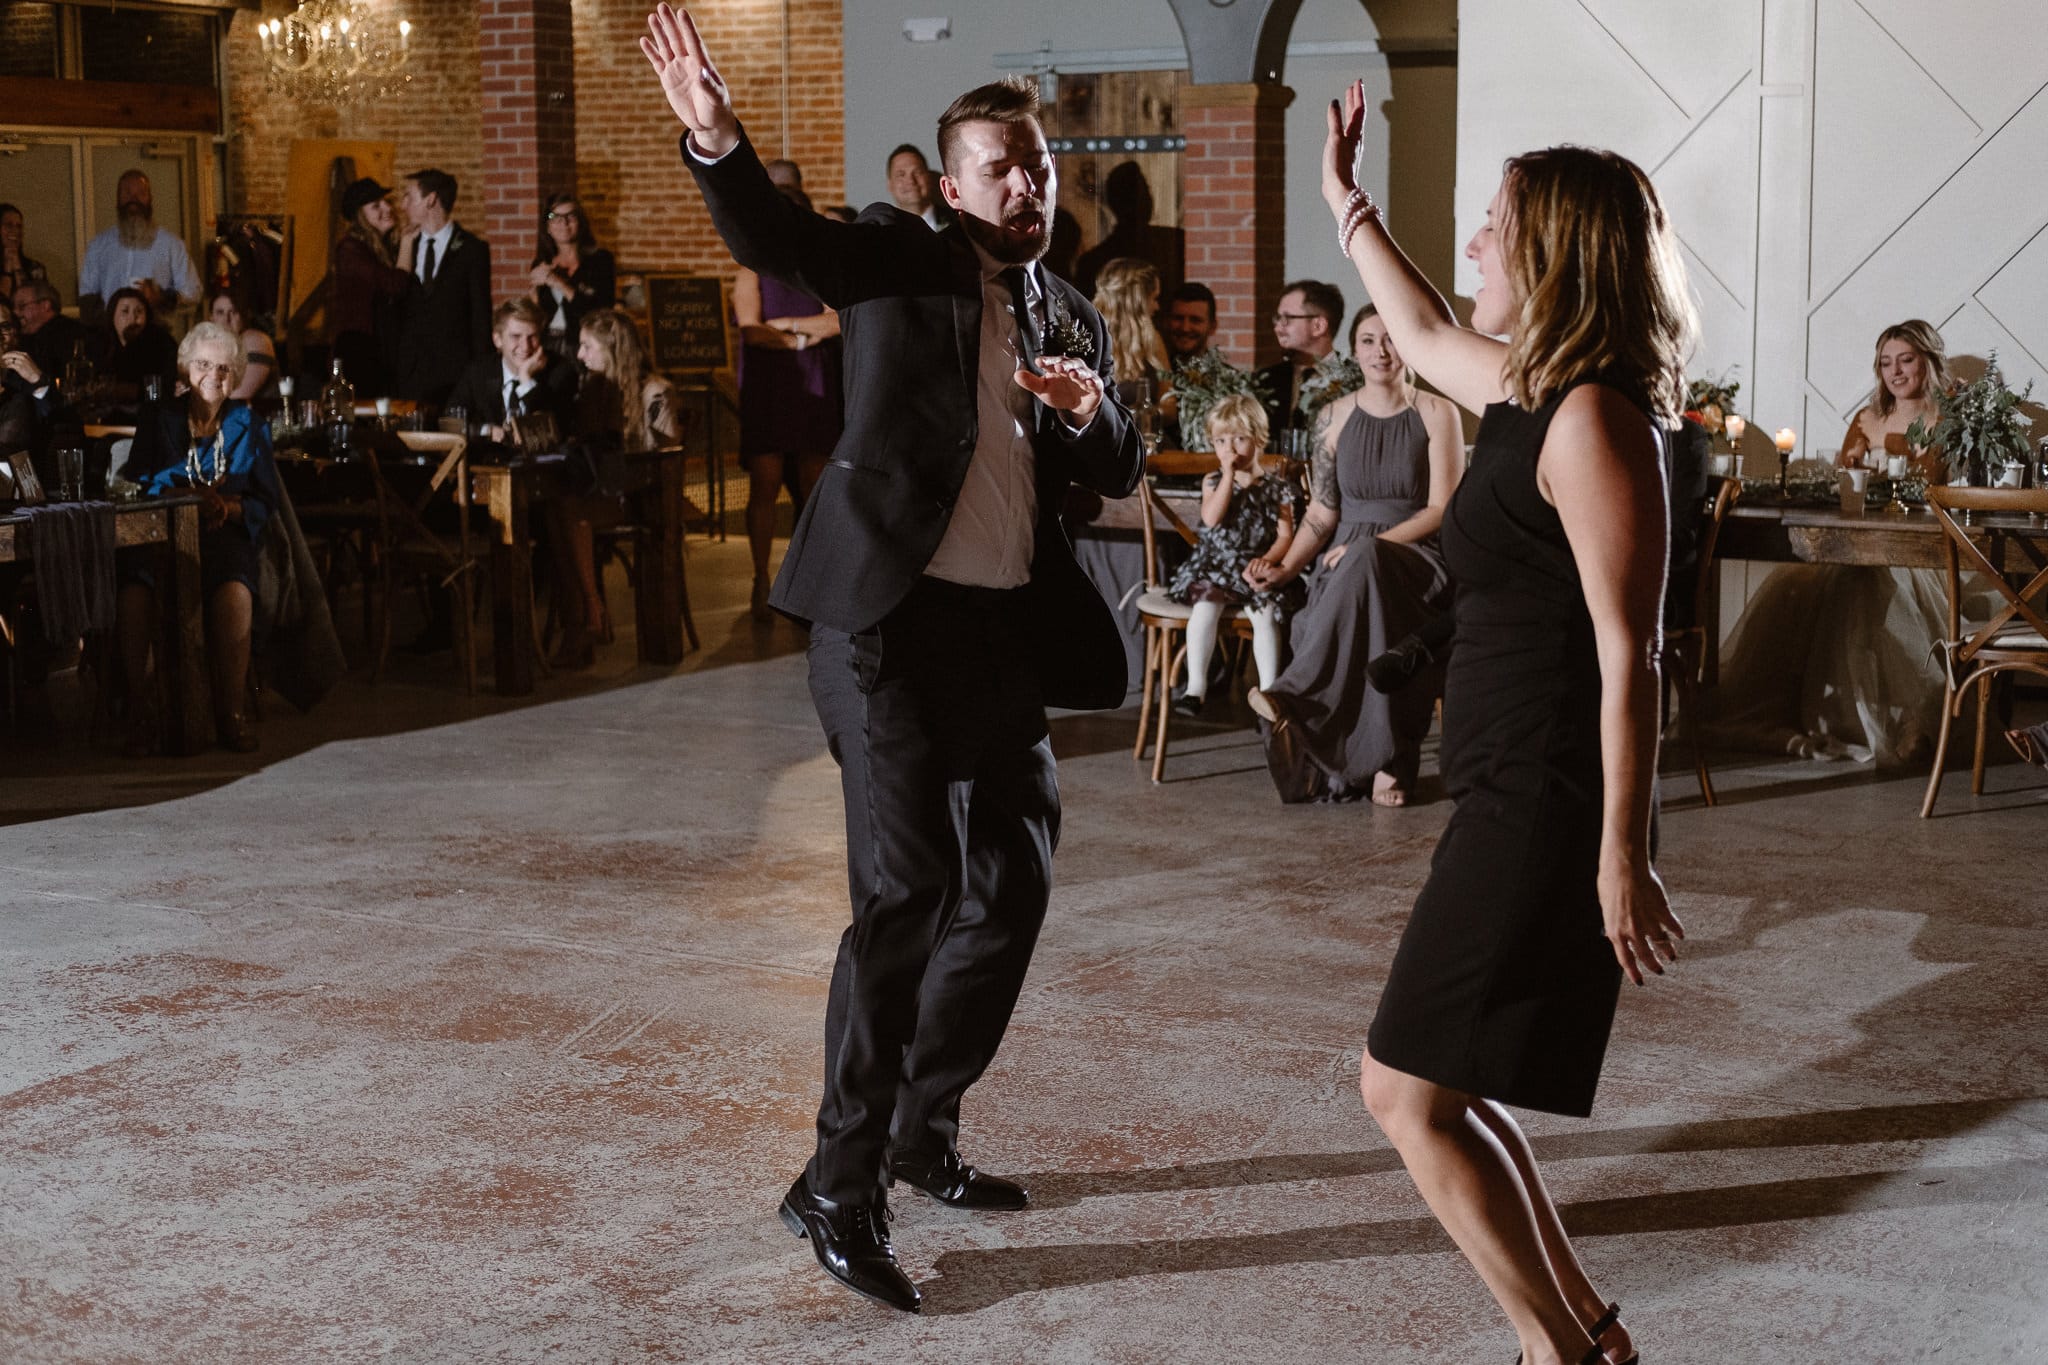 St Vrain Wedding Photographer | Longmont Wedding Photographer | Colorado Winter Wedding Photographer, Colorado industrial chic wedding ceremony, groom dancing with his mother, off camera flash photography reception lighting